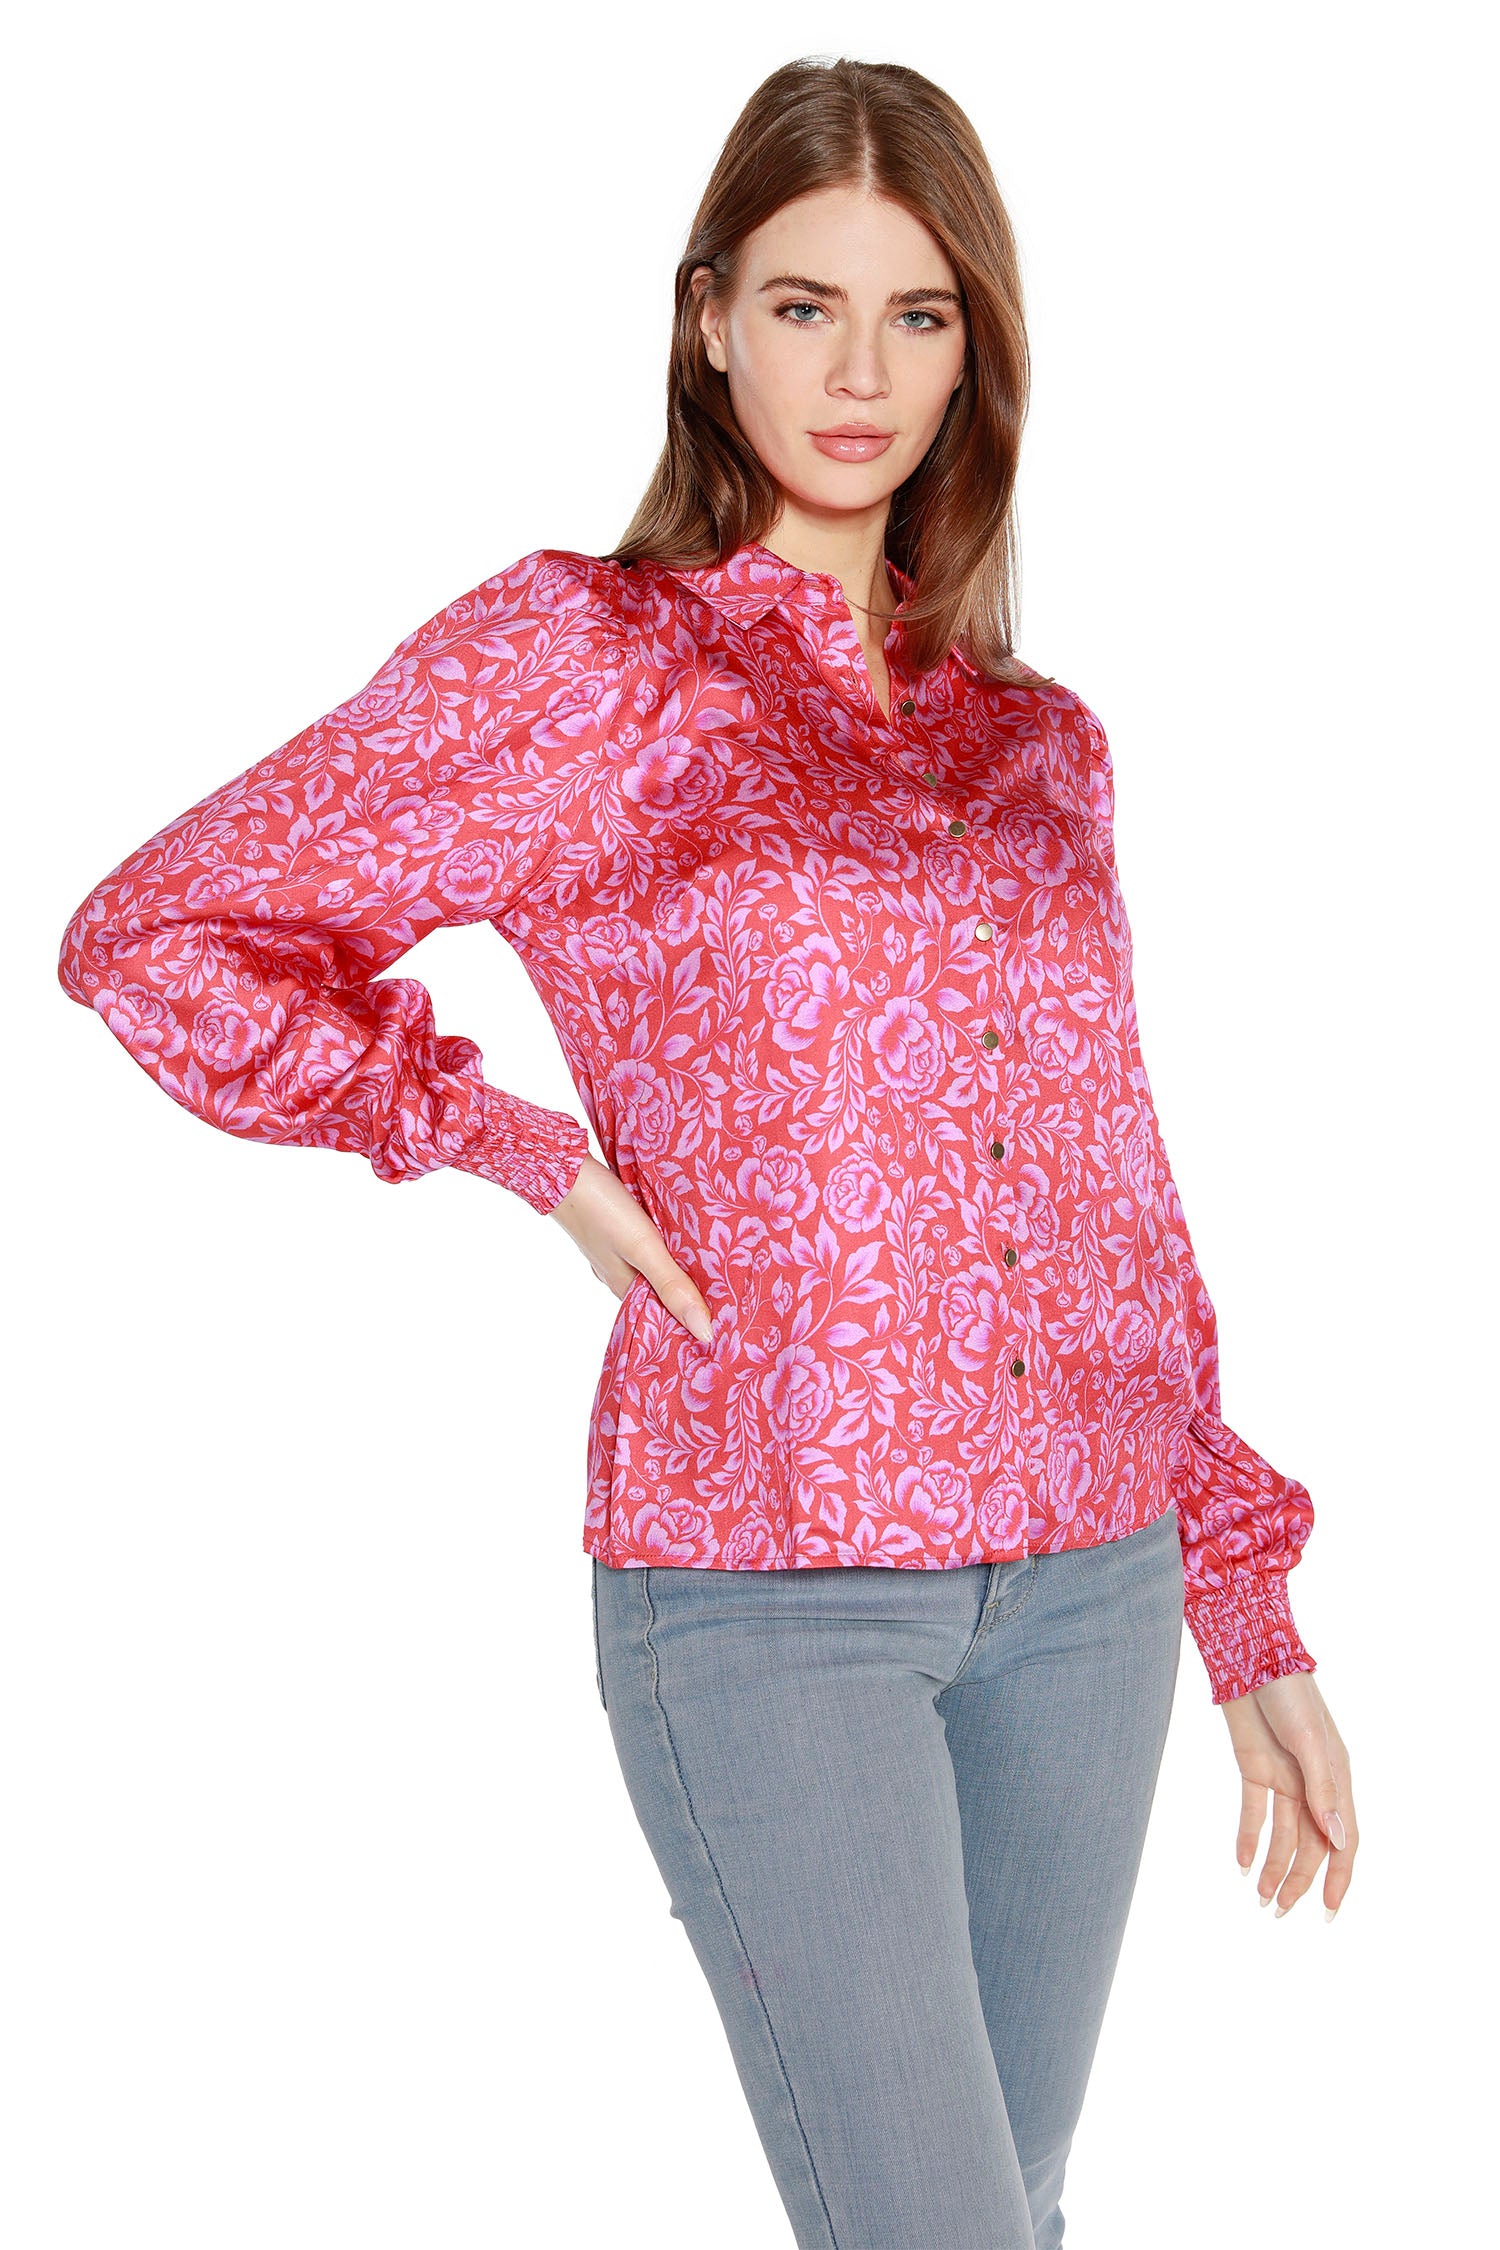 Women’s Floral Printed Button Front Shirt with Bishop Sleeves